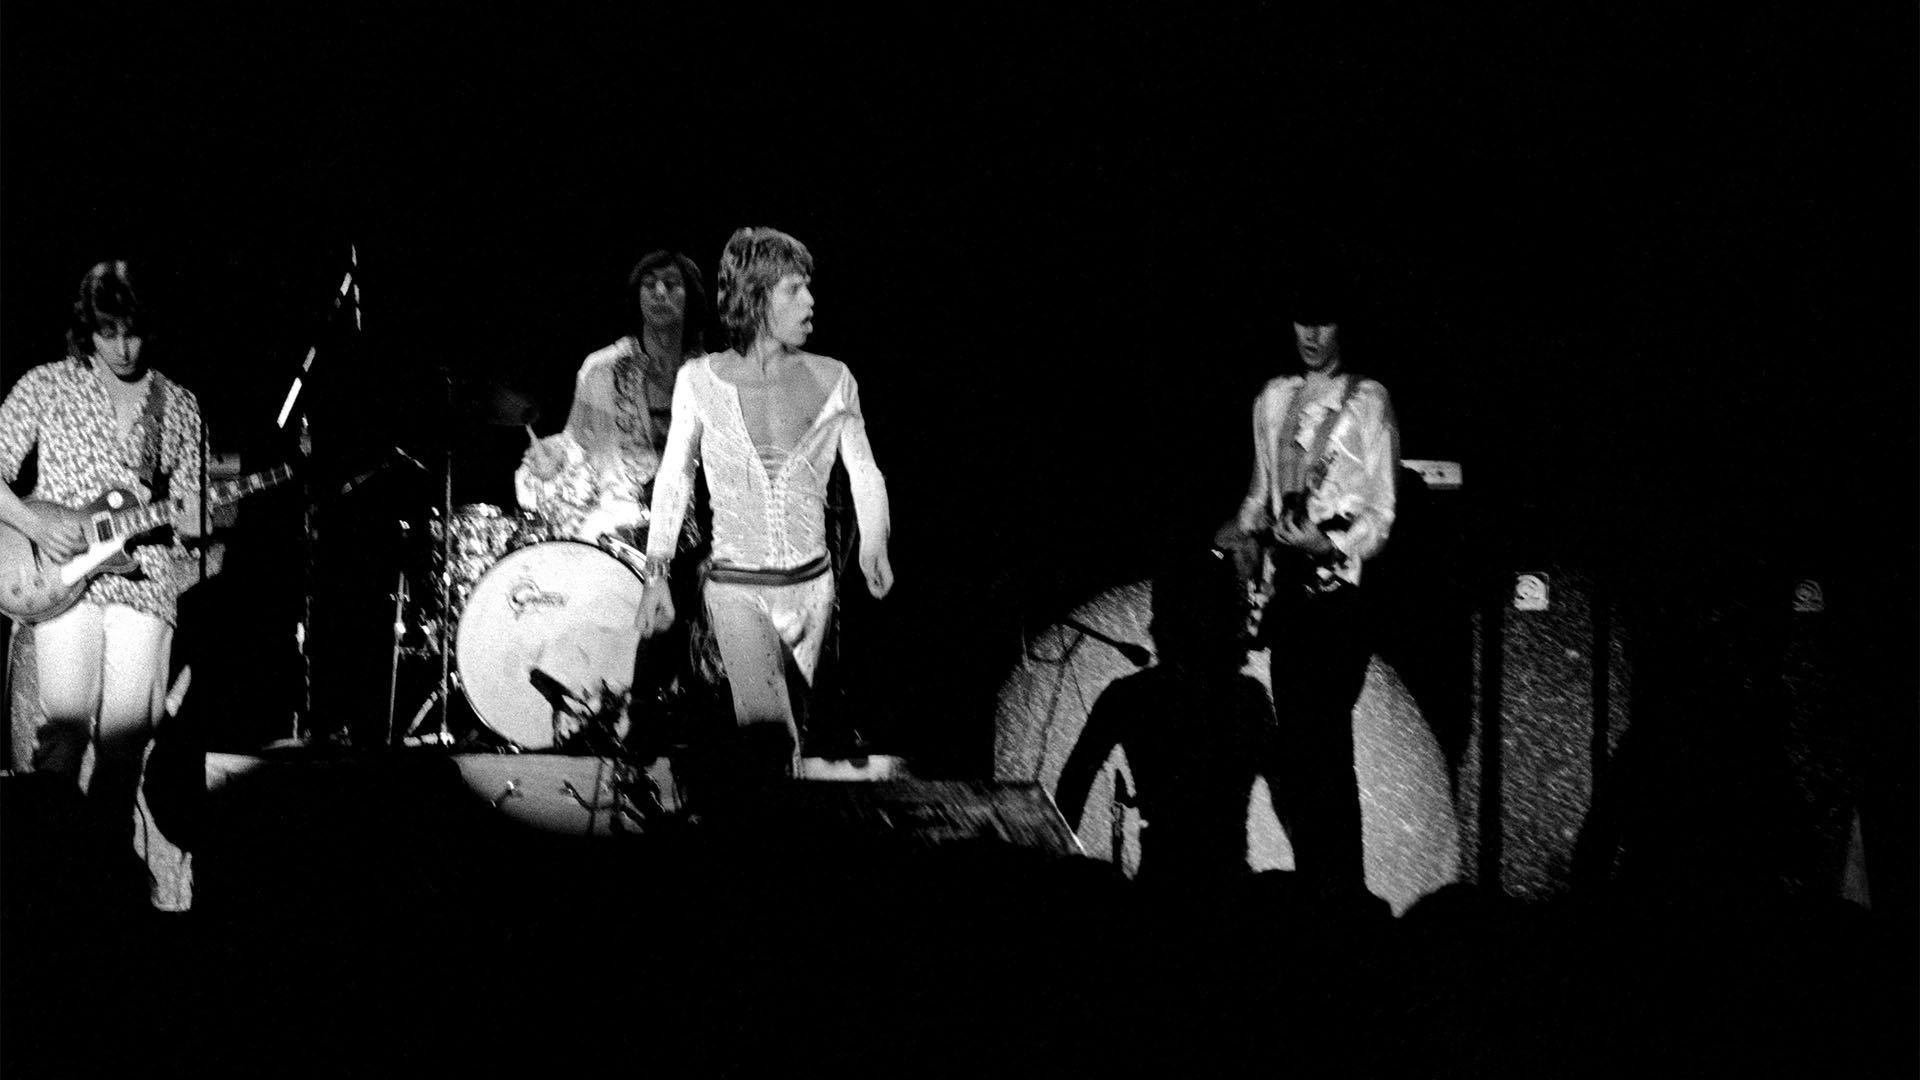 Mick Taylor, Charlie Watts, Mick Jagger and Keith Richards at the Winterland Ballroom in San Francisco on June 6, 1972 (Photo by Robert Altman/Michael Ochs Archives/Getty Images)